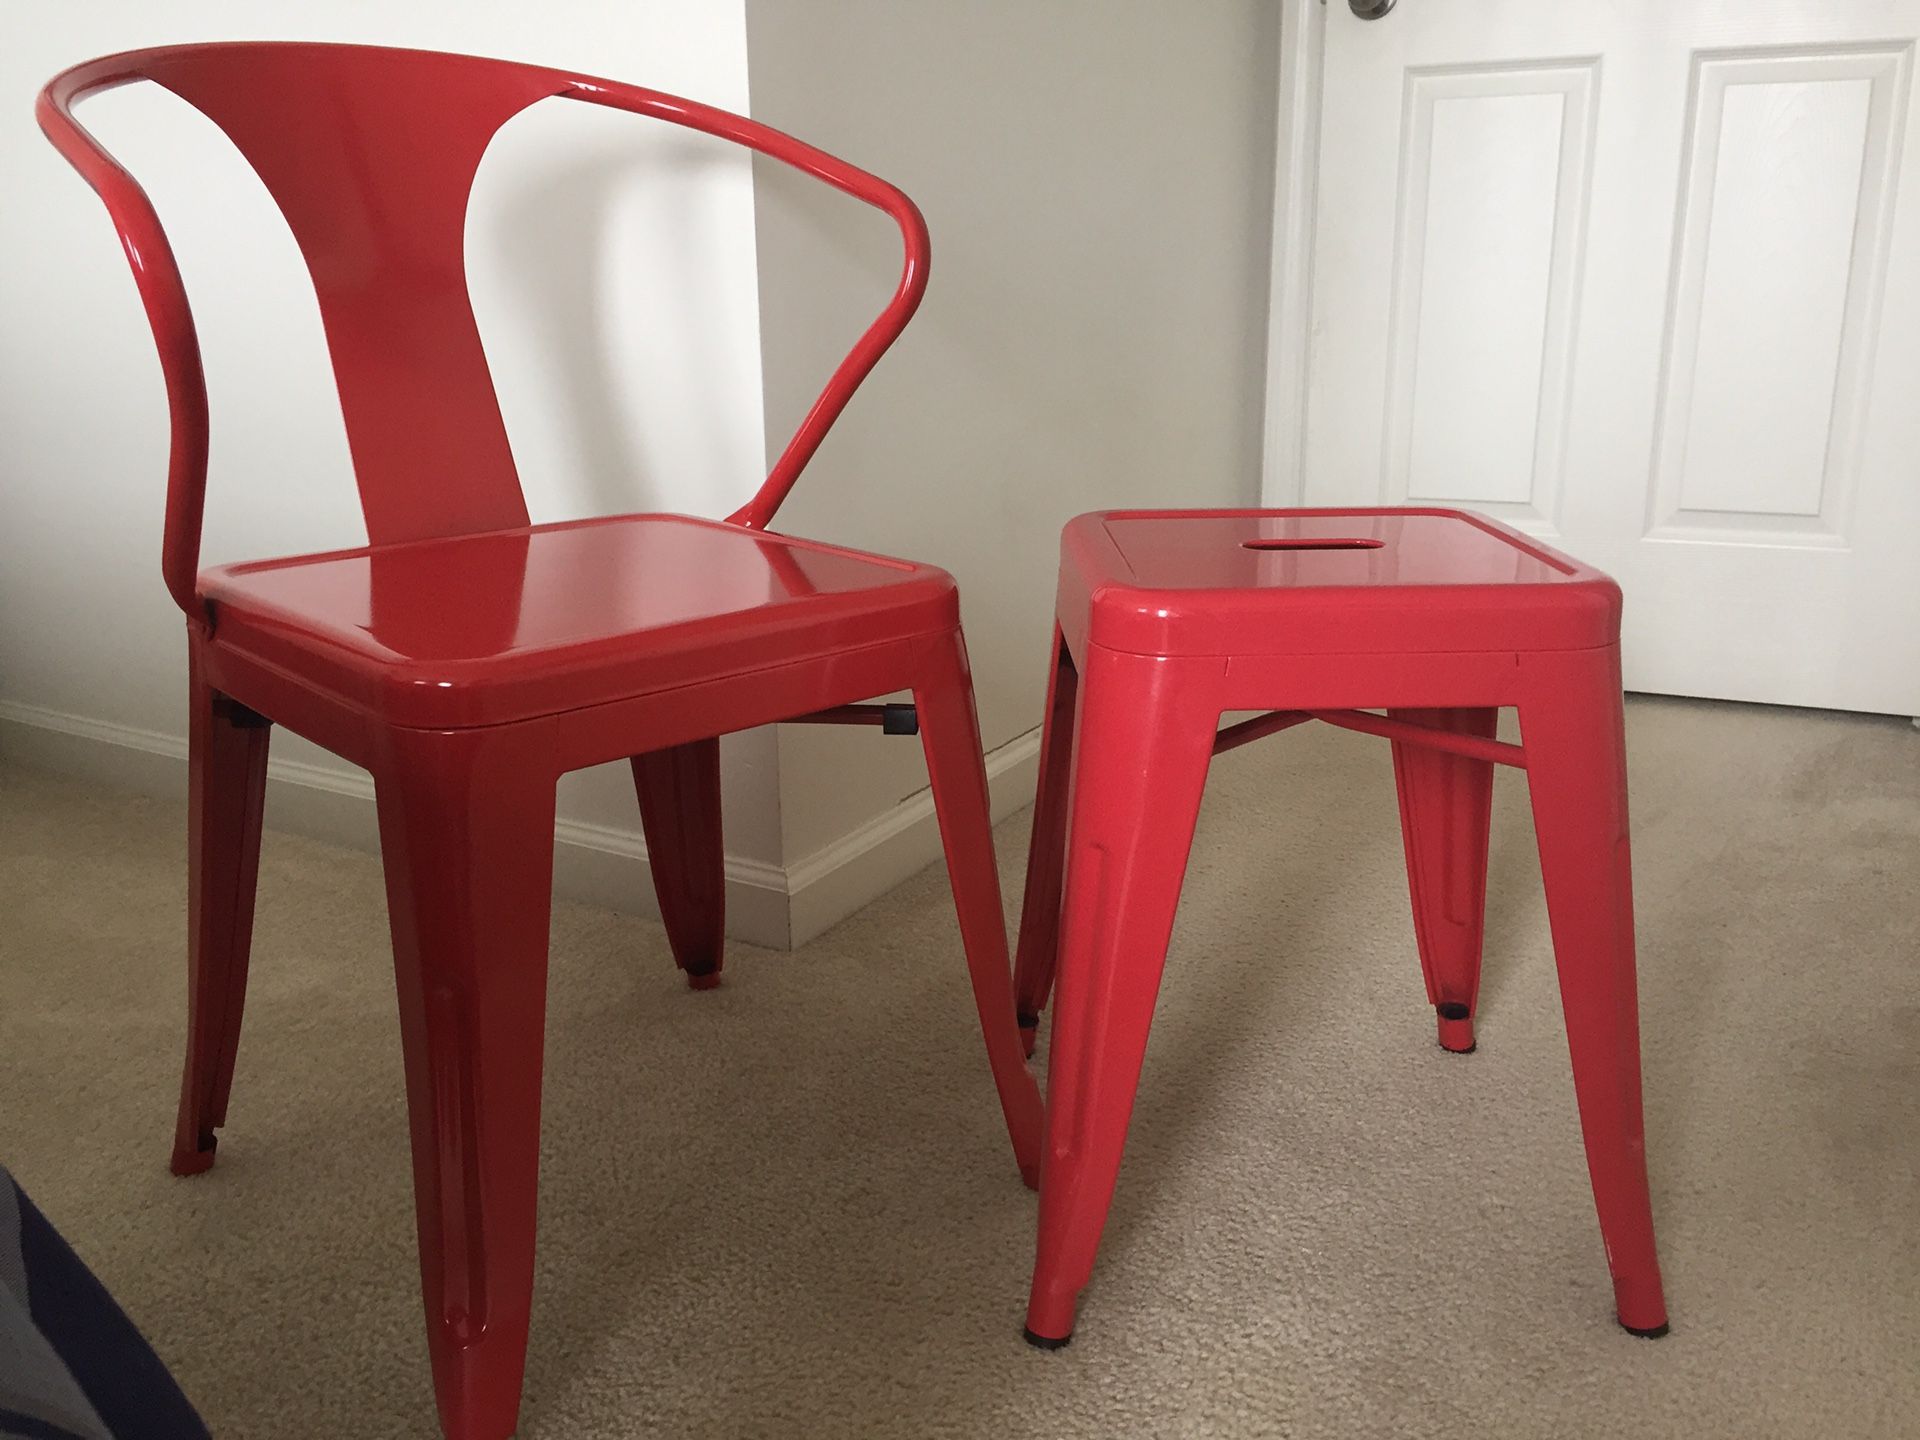 Red Metal Chair and Stool, Matching Touch Lamp and Red Metal Basket